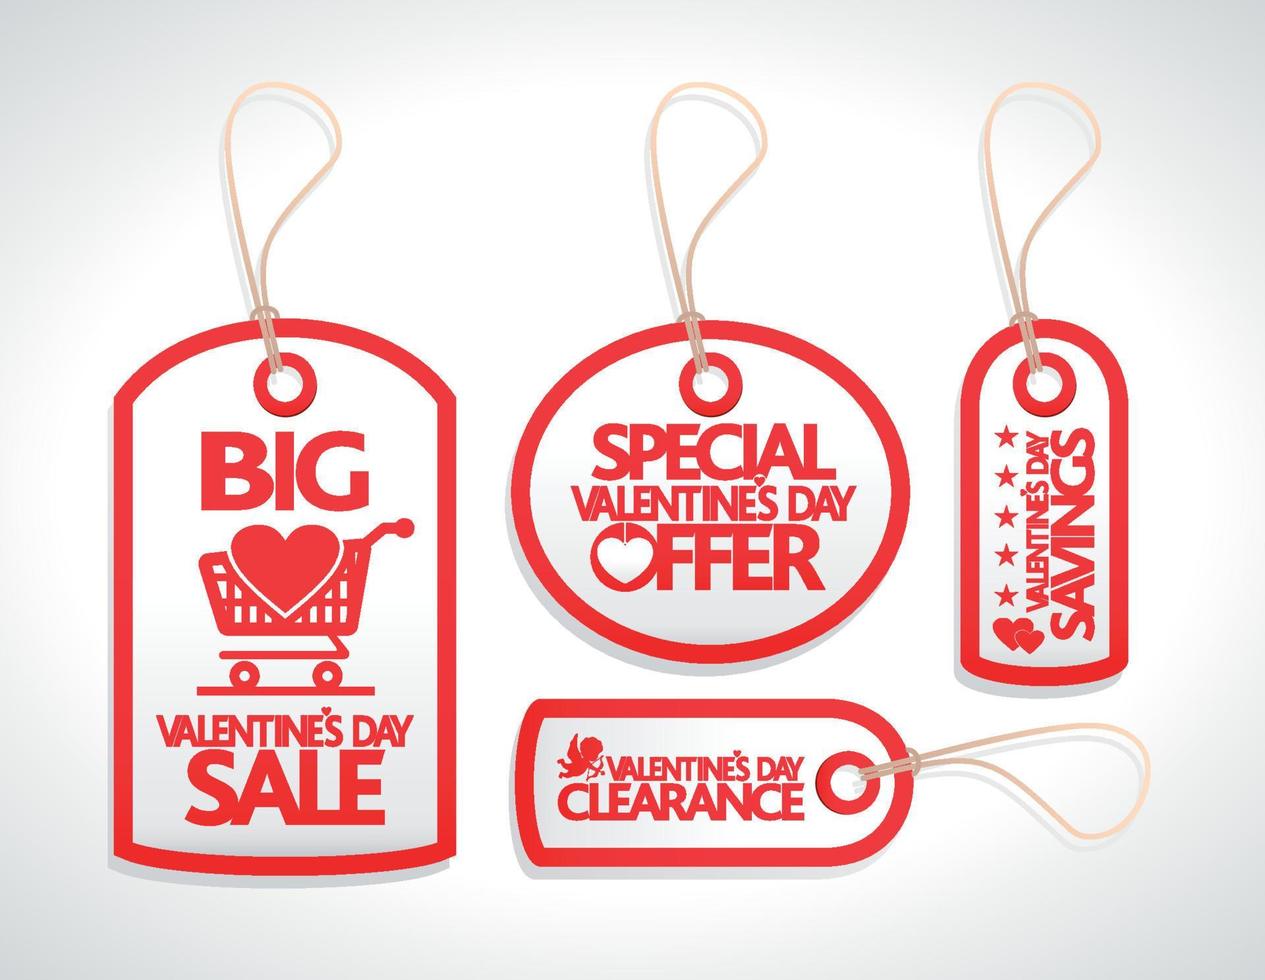 Valentines day sale red, white tags set with red text. Vector illustration